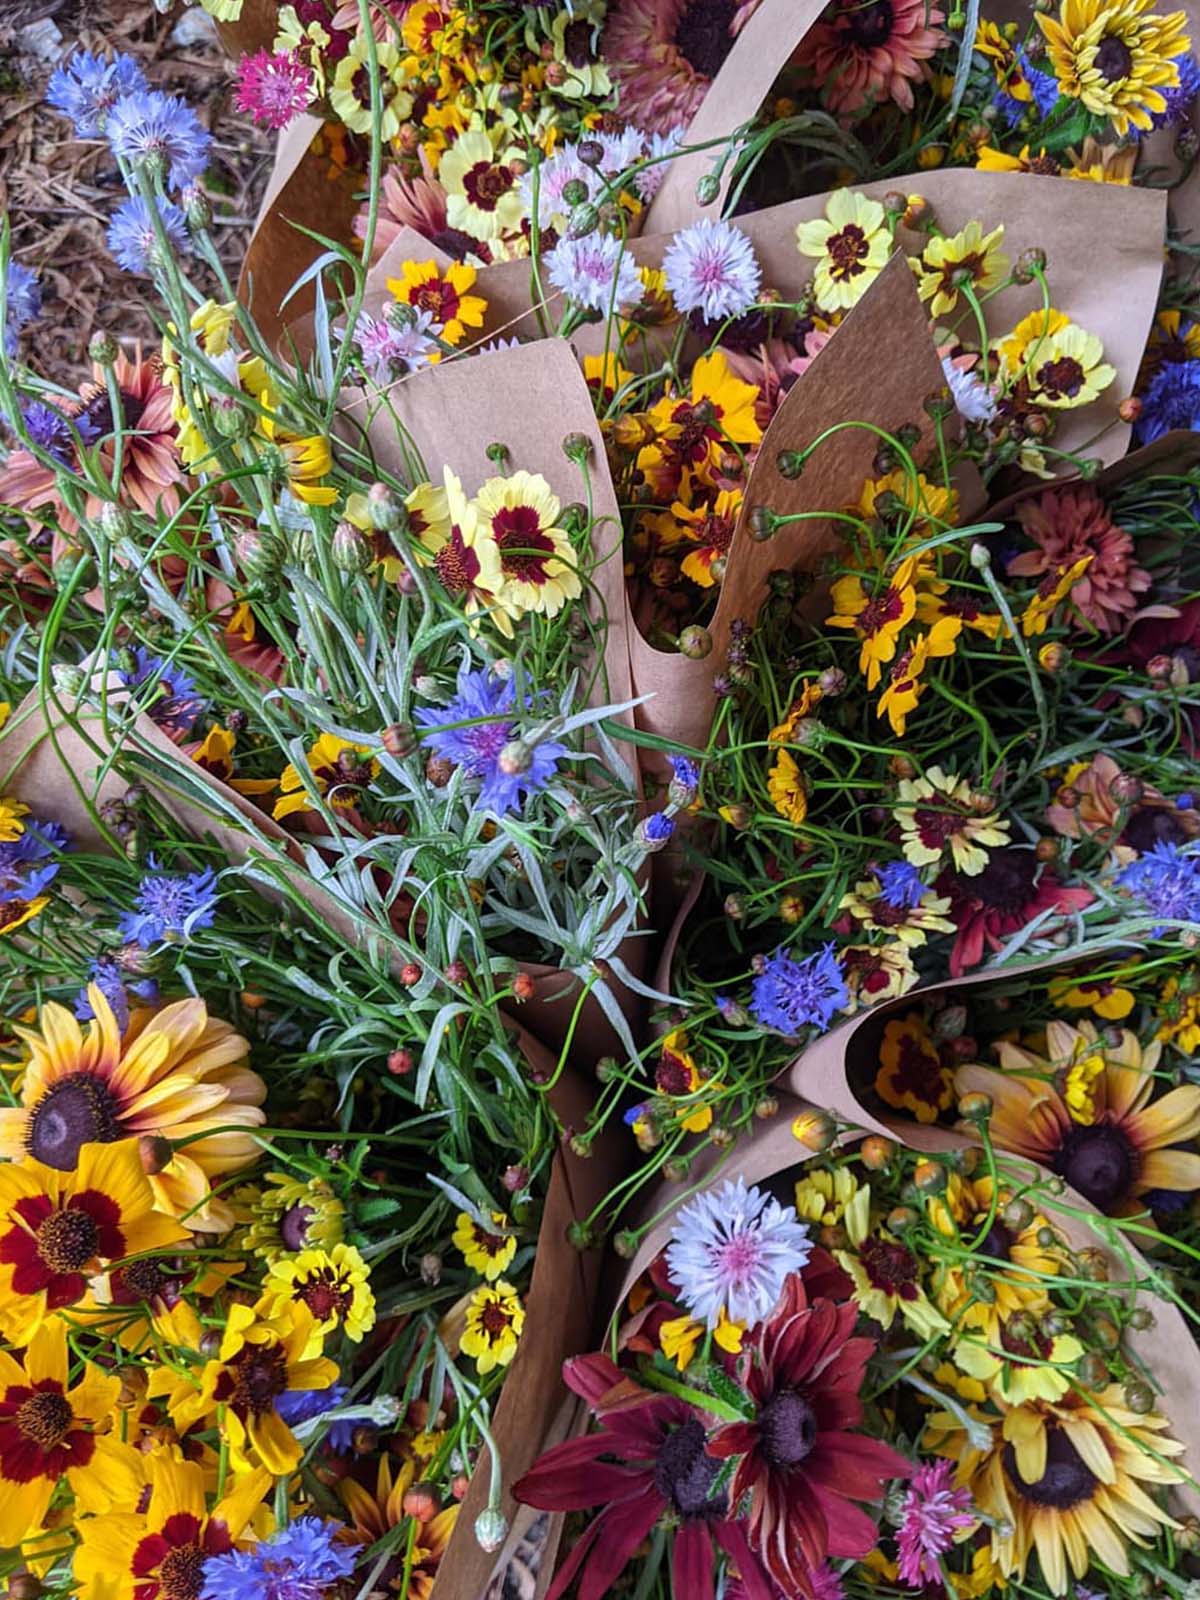 Local Farmer-Florists Are Blooming 11 Stars of the Meadow